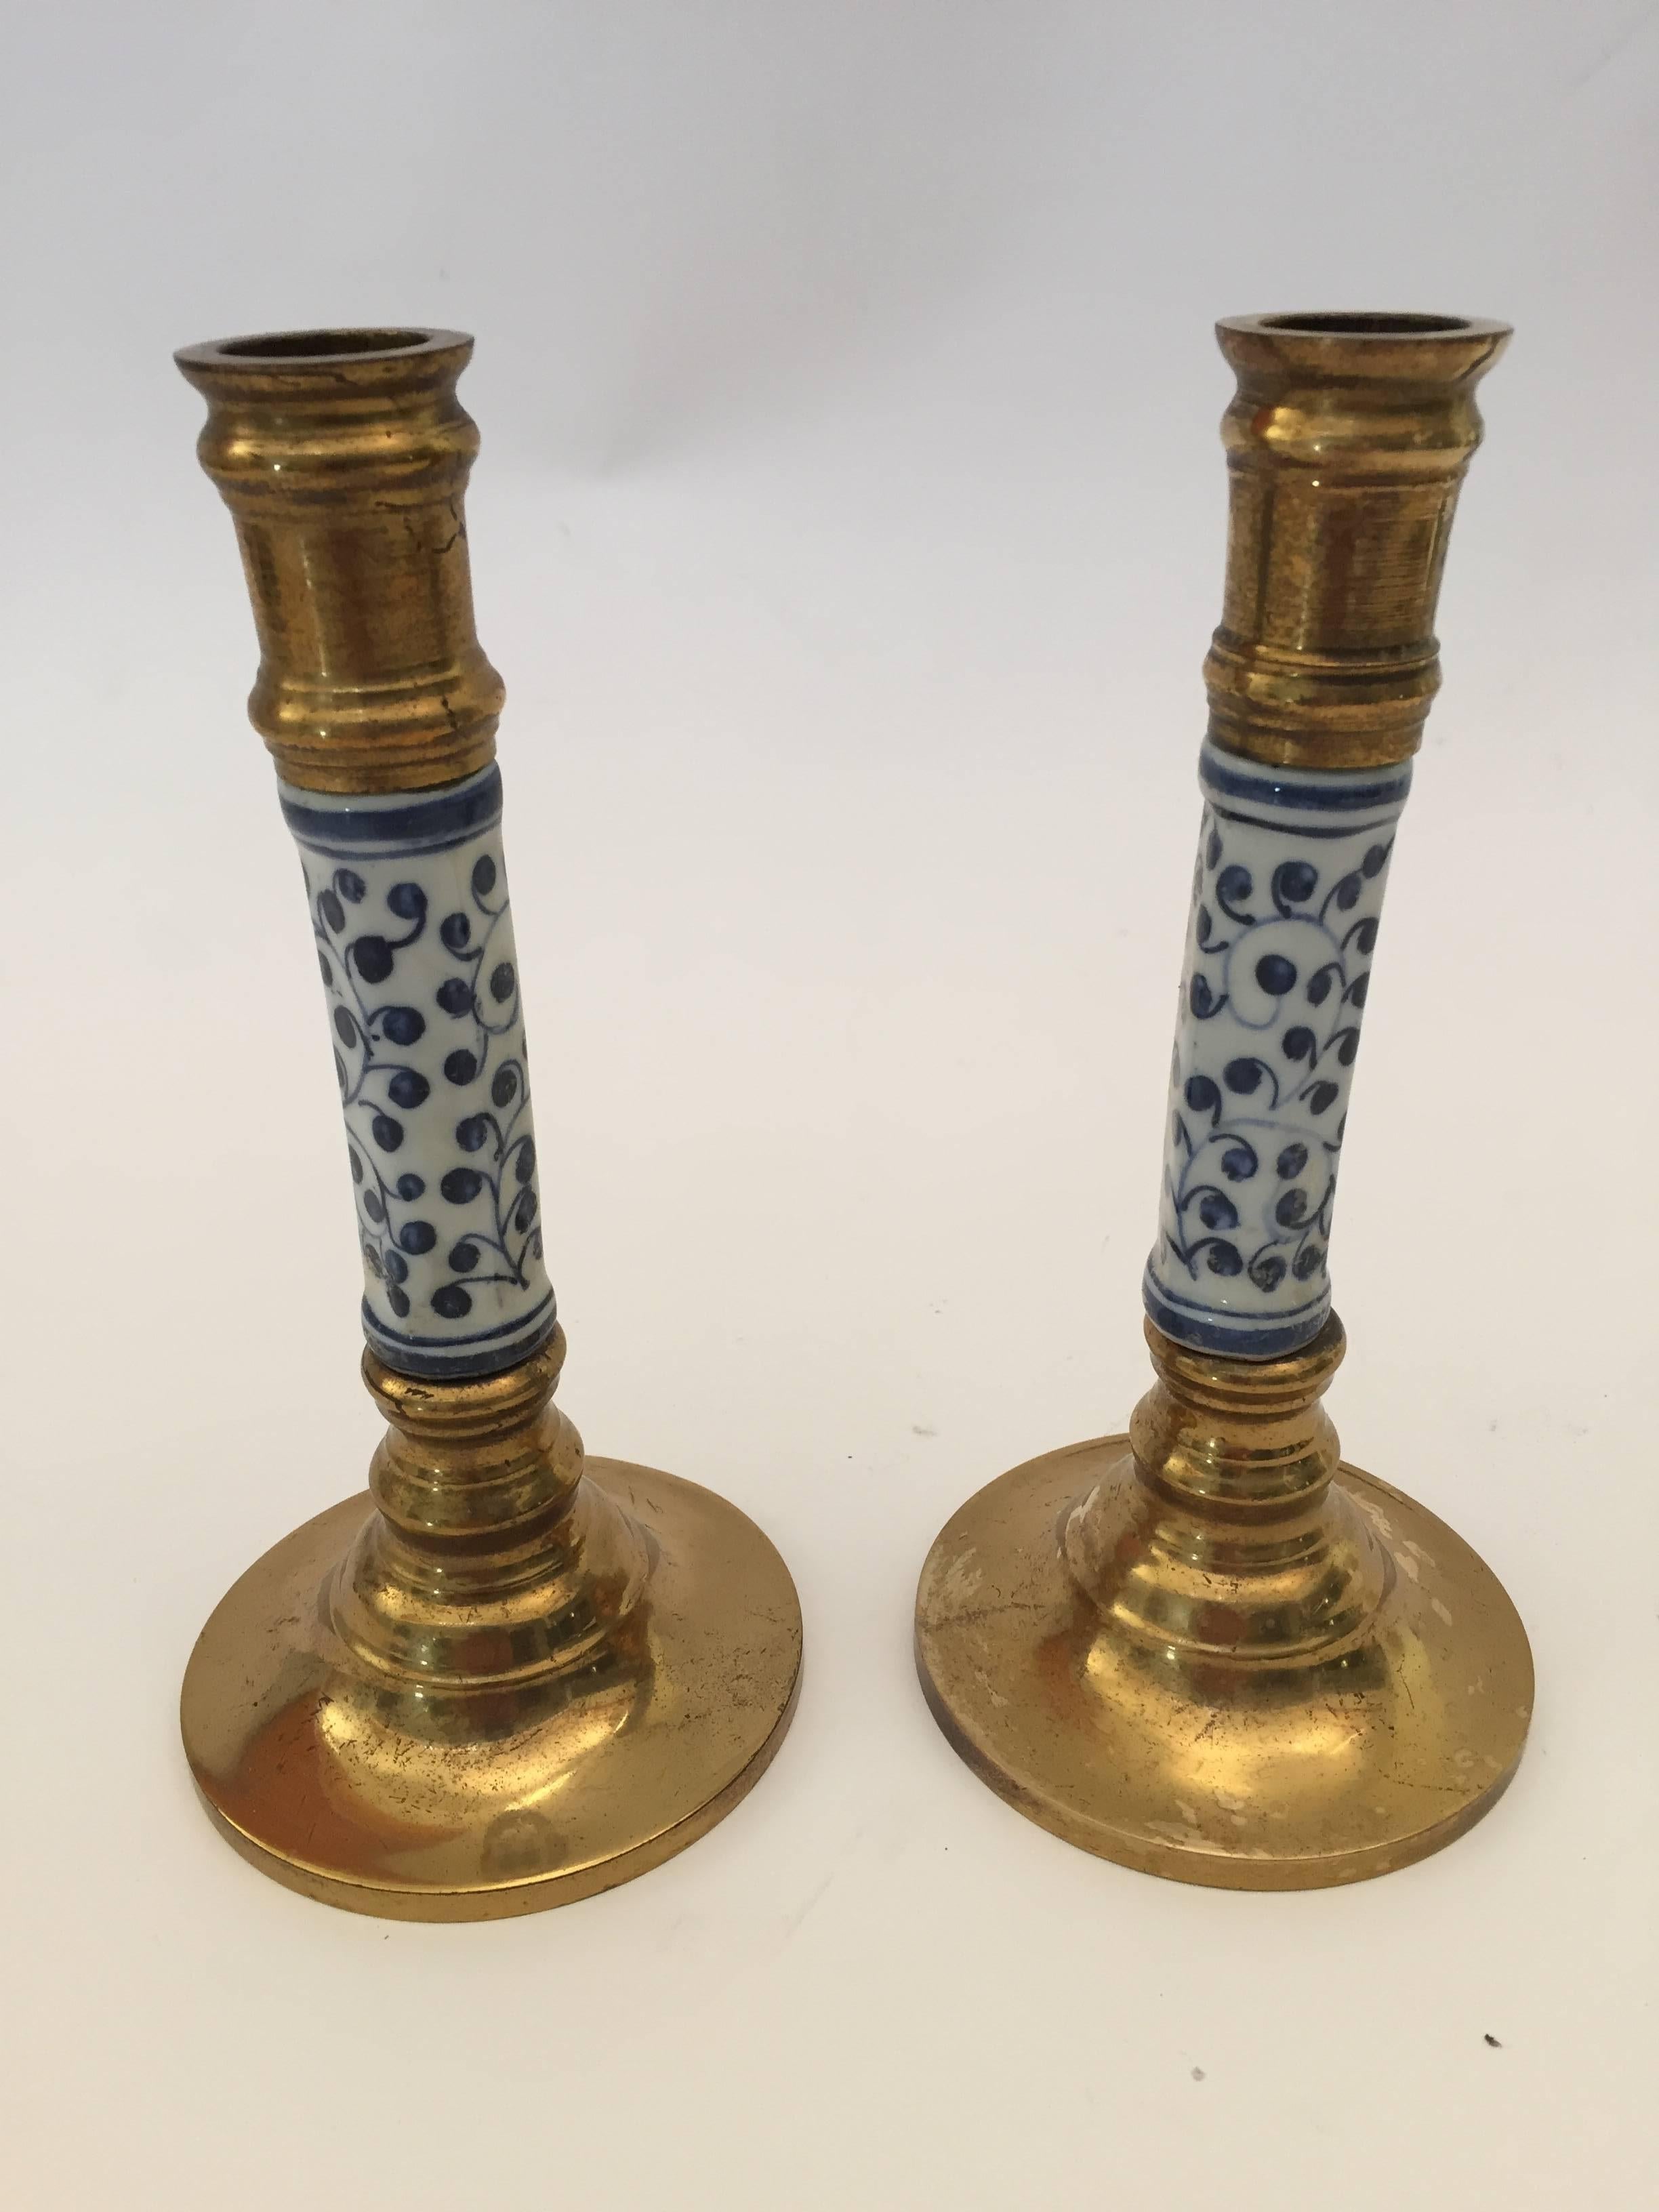 Pair of Victorian brass candlestick with ceramic in blue and white.
Size: 11.5